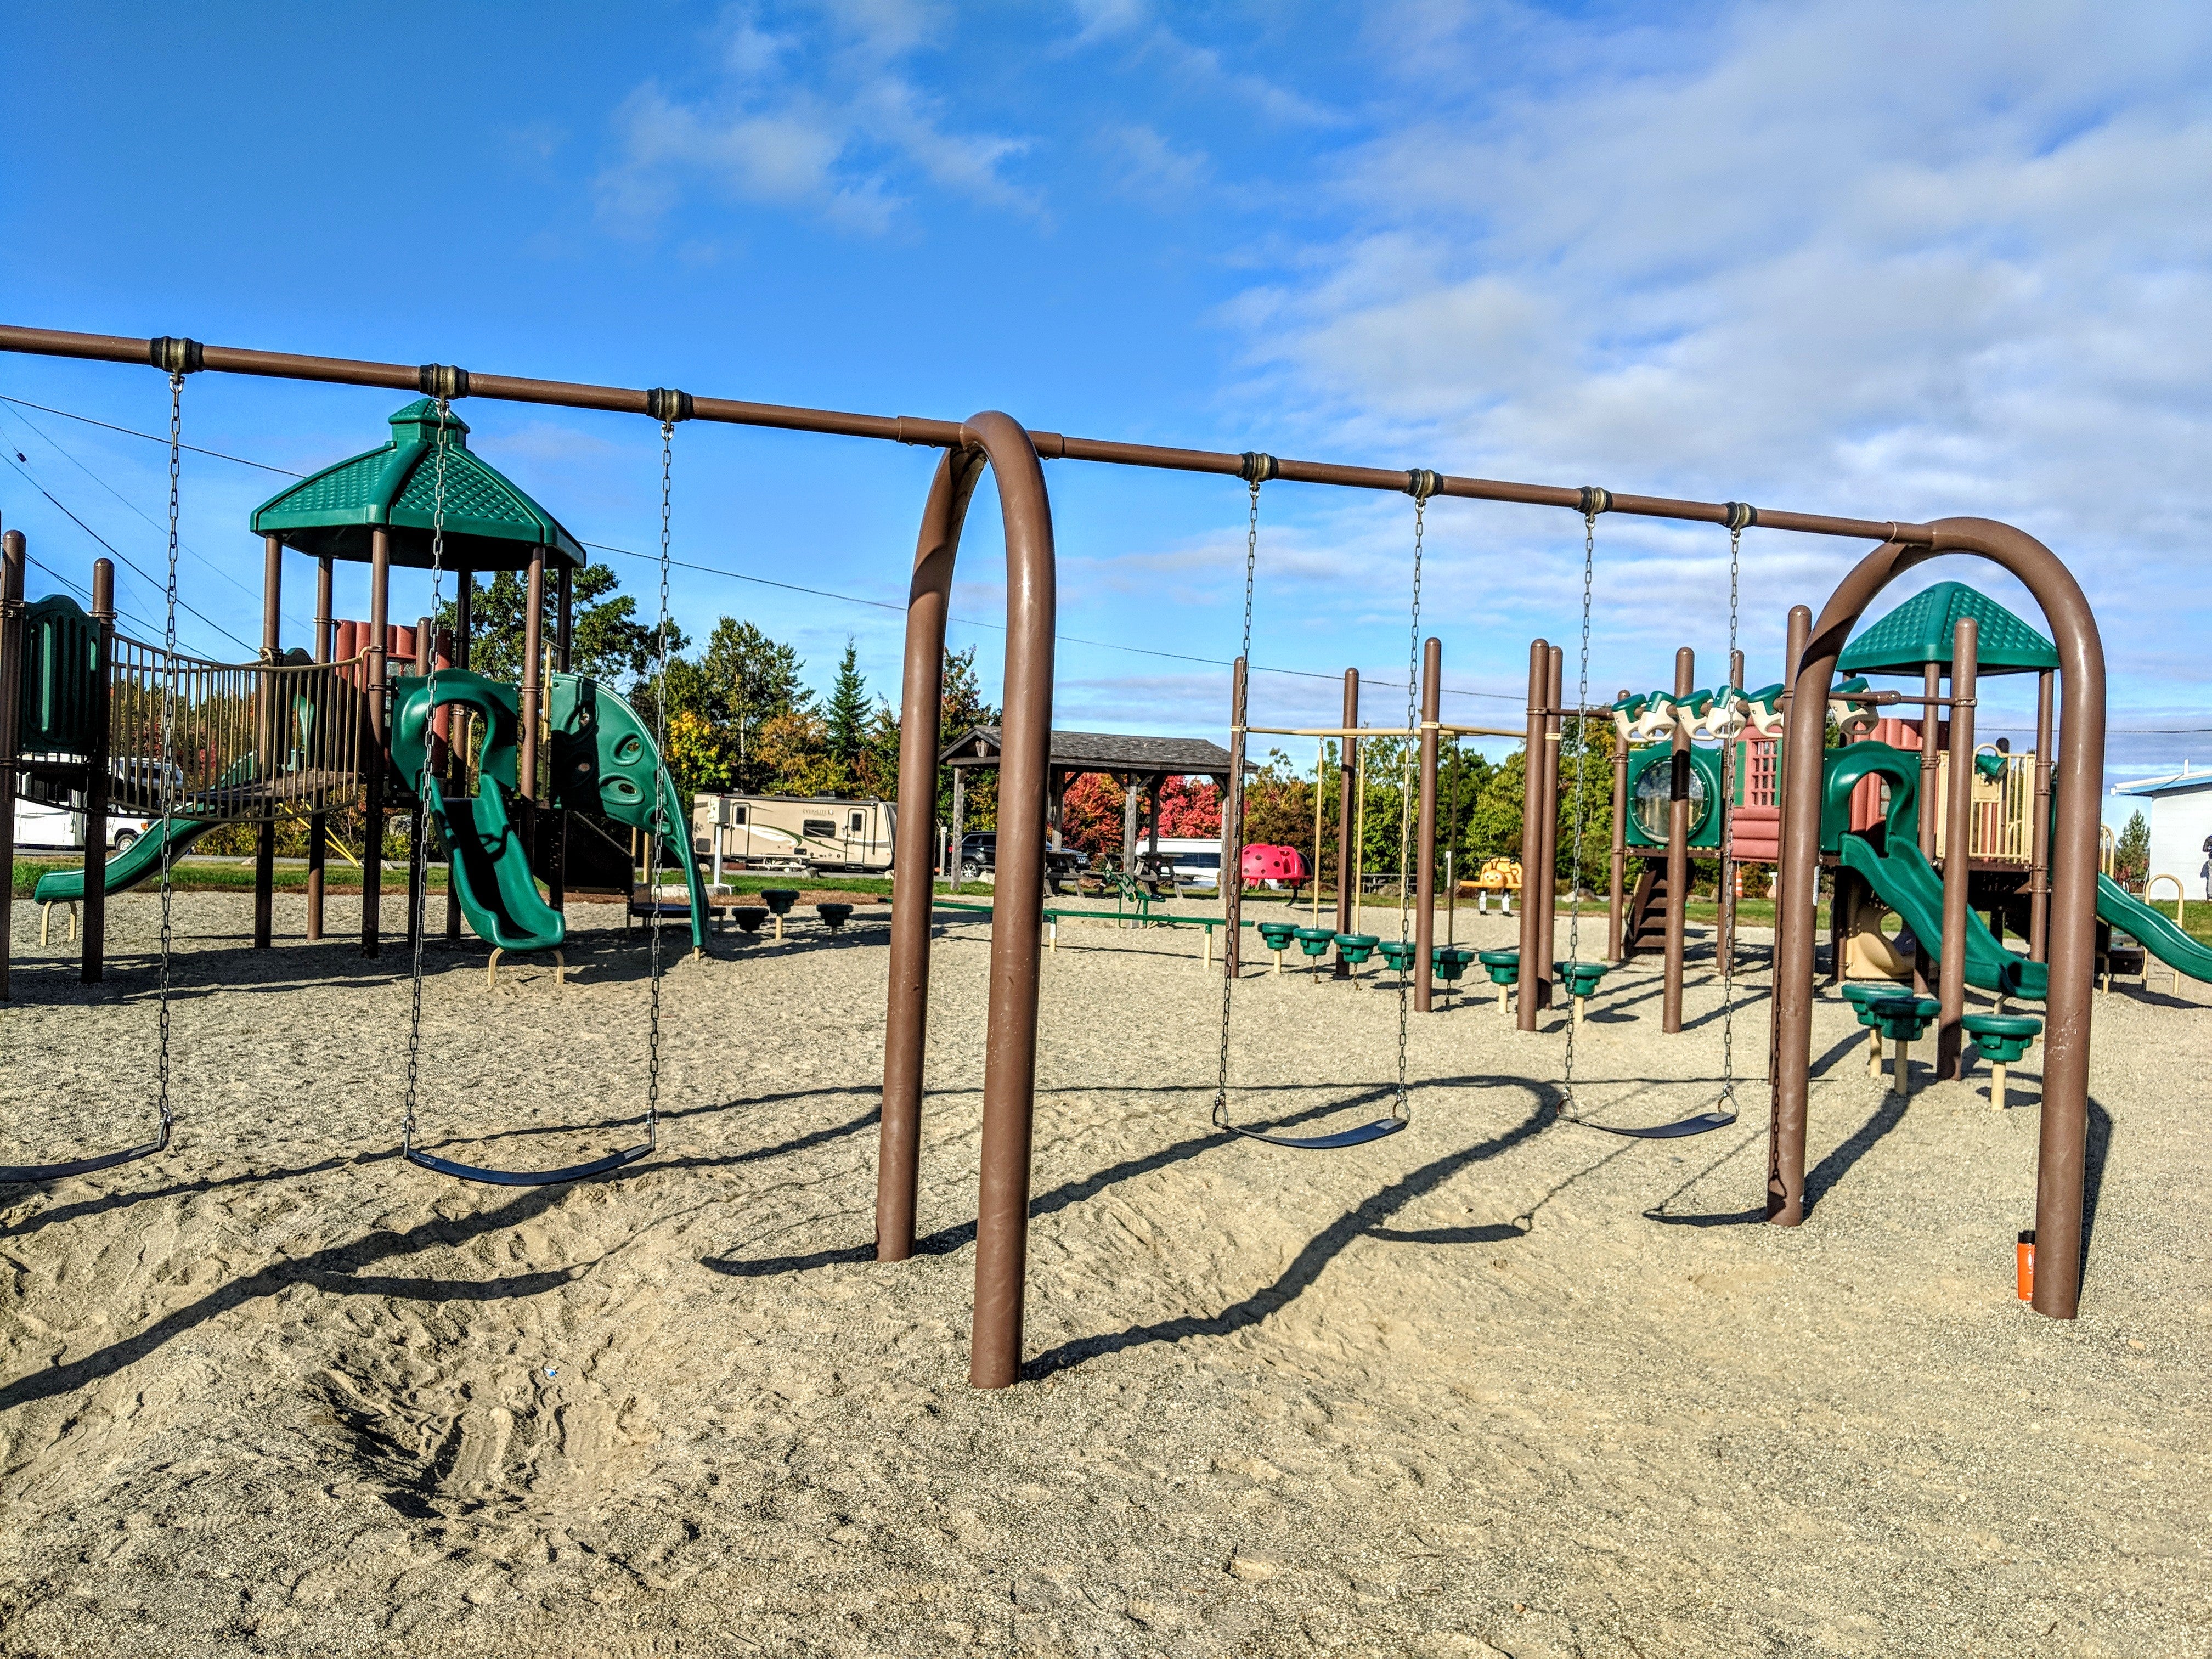 A playground for the kiddos.